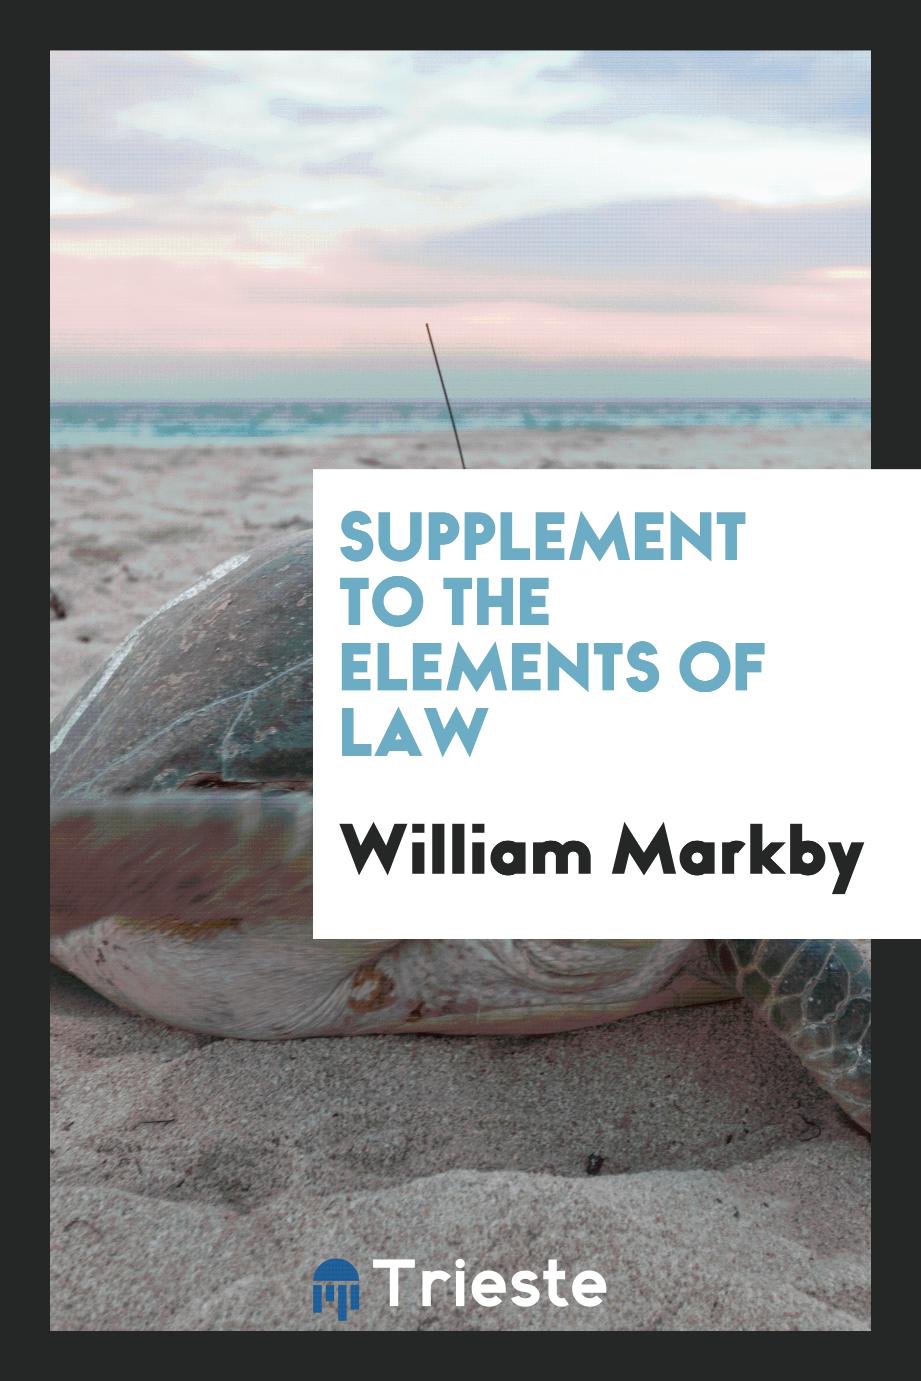 Supplement to the Elements of Law